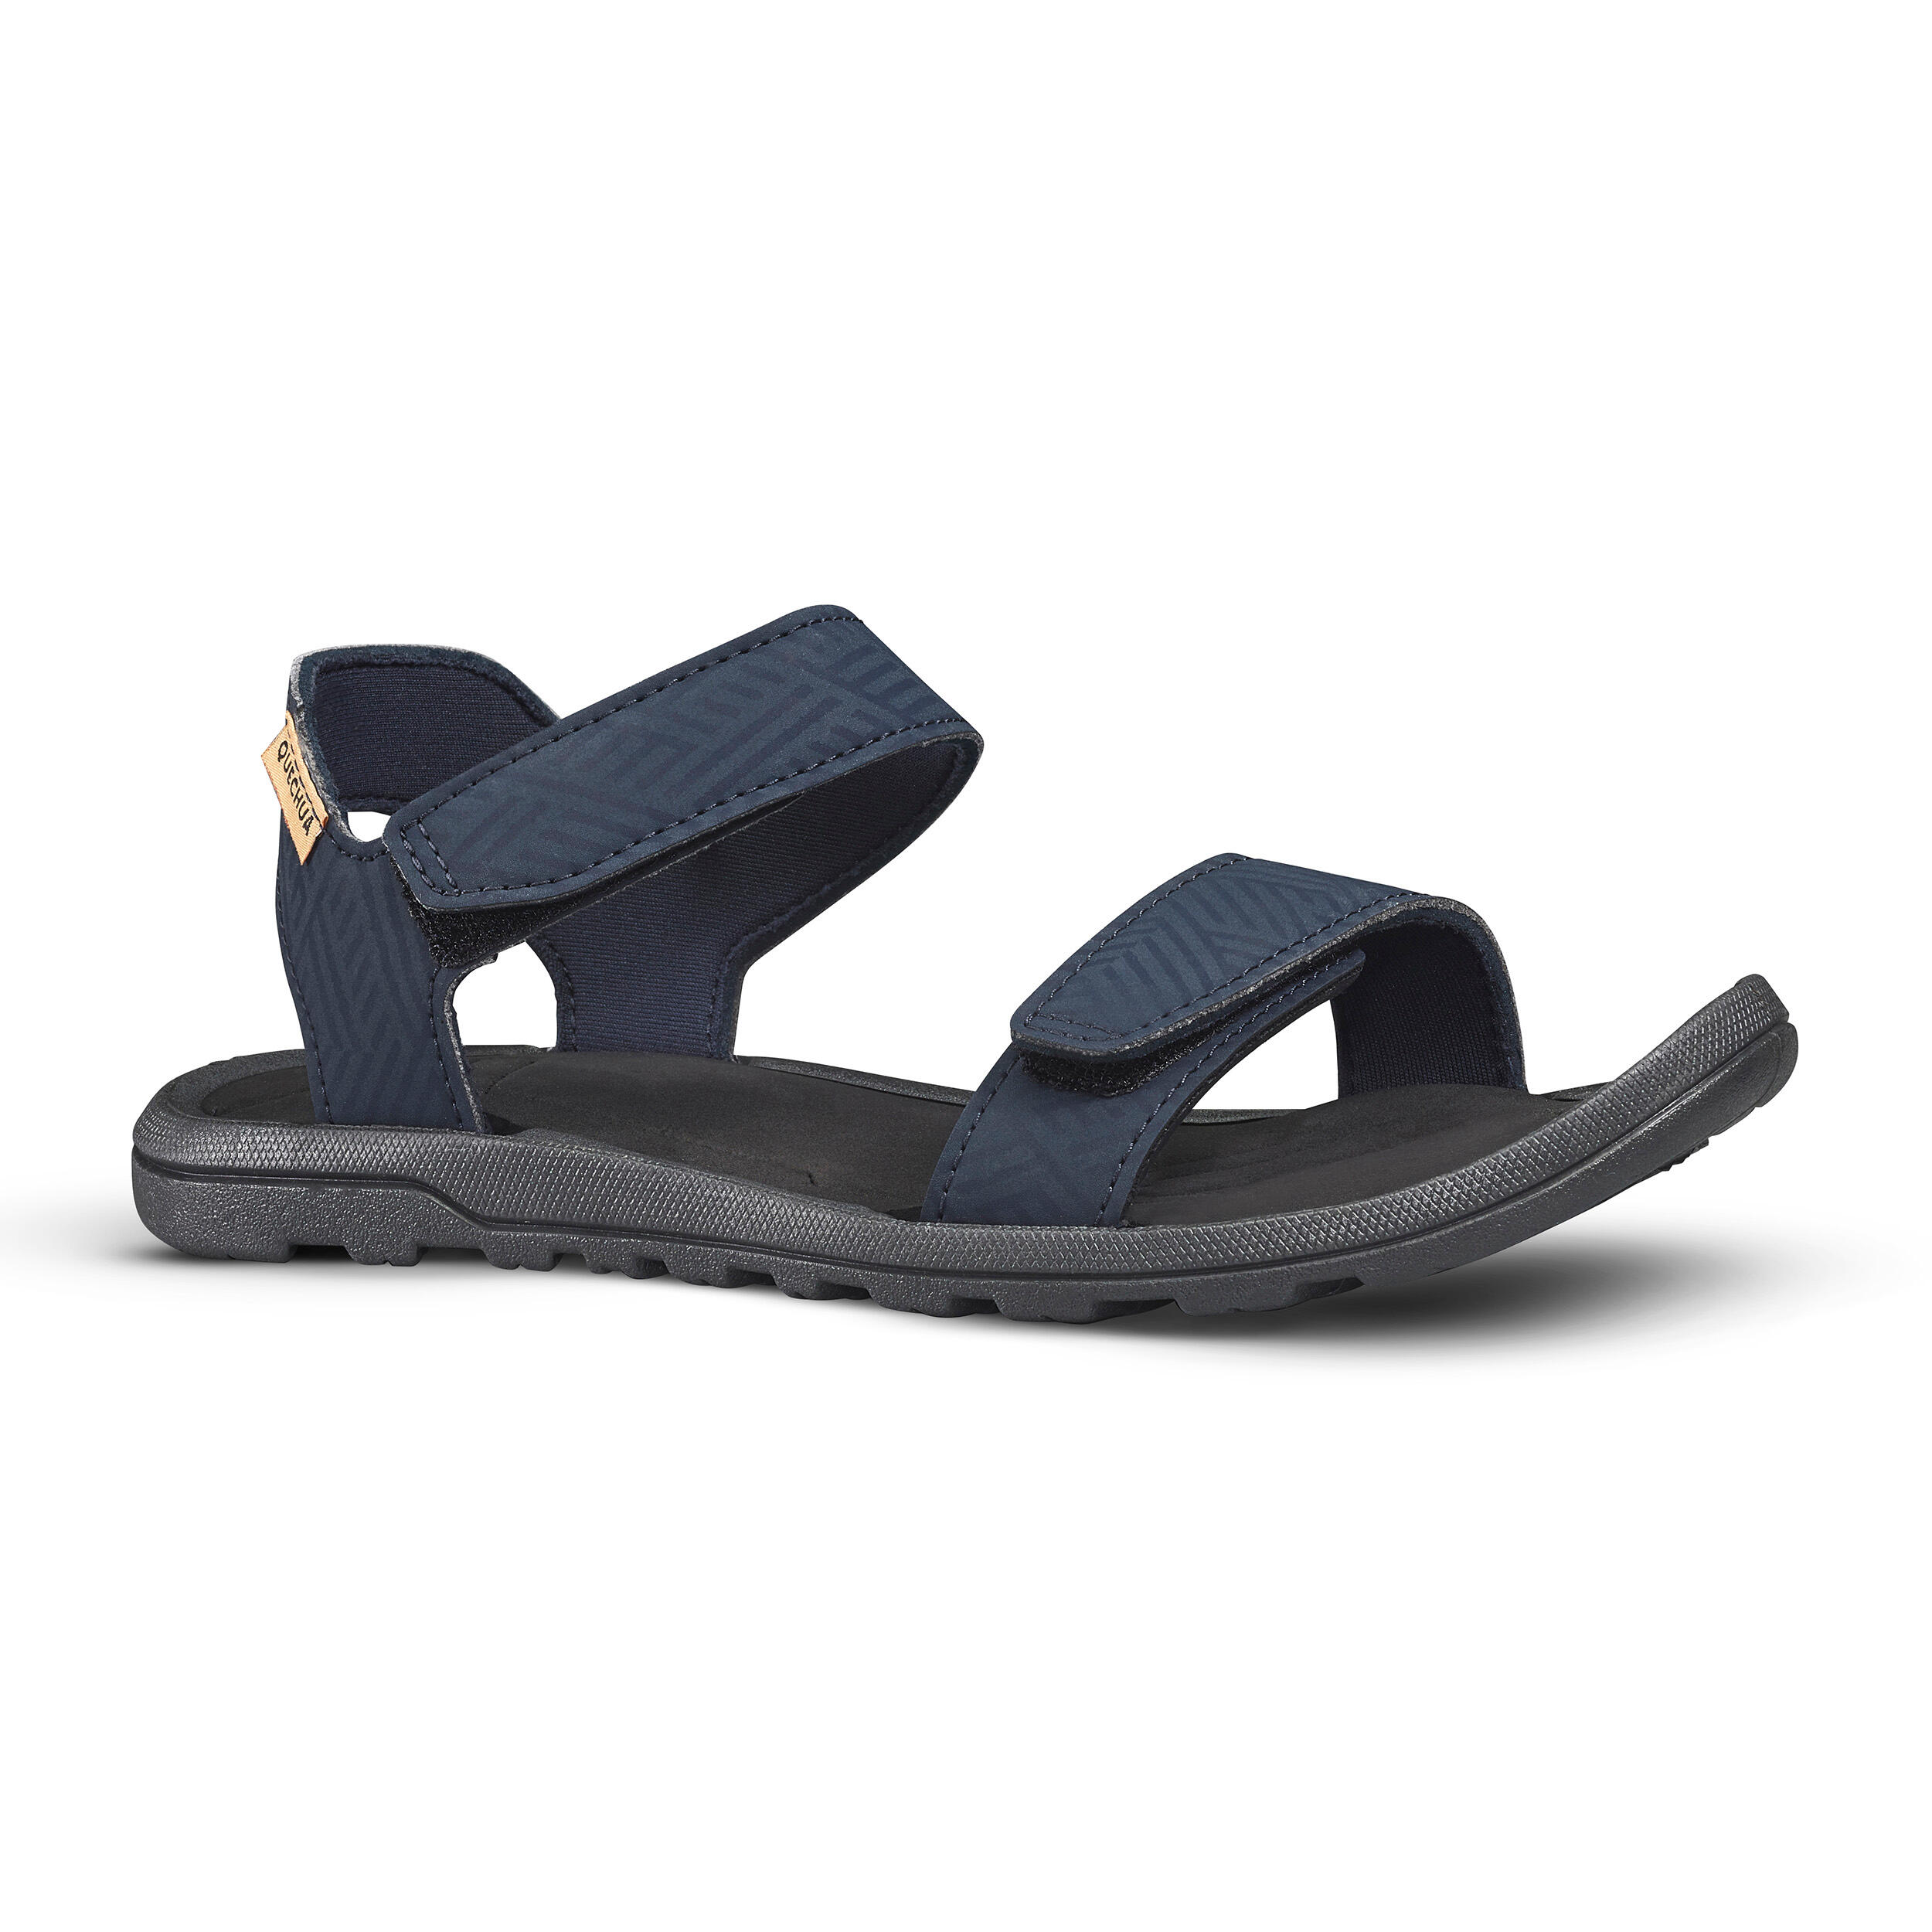 Decathlon Kids Sandals and Slippers Styles, Prices - Trendyol